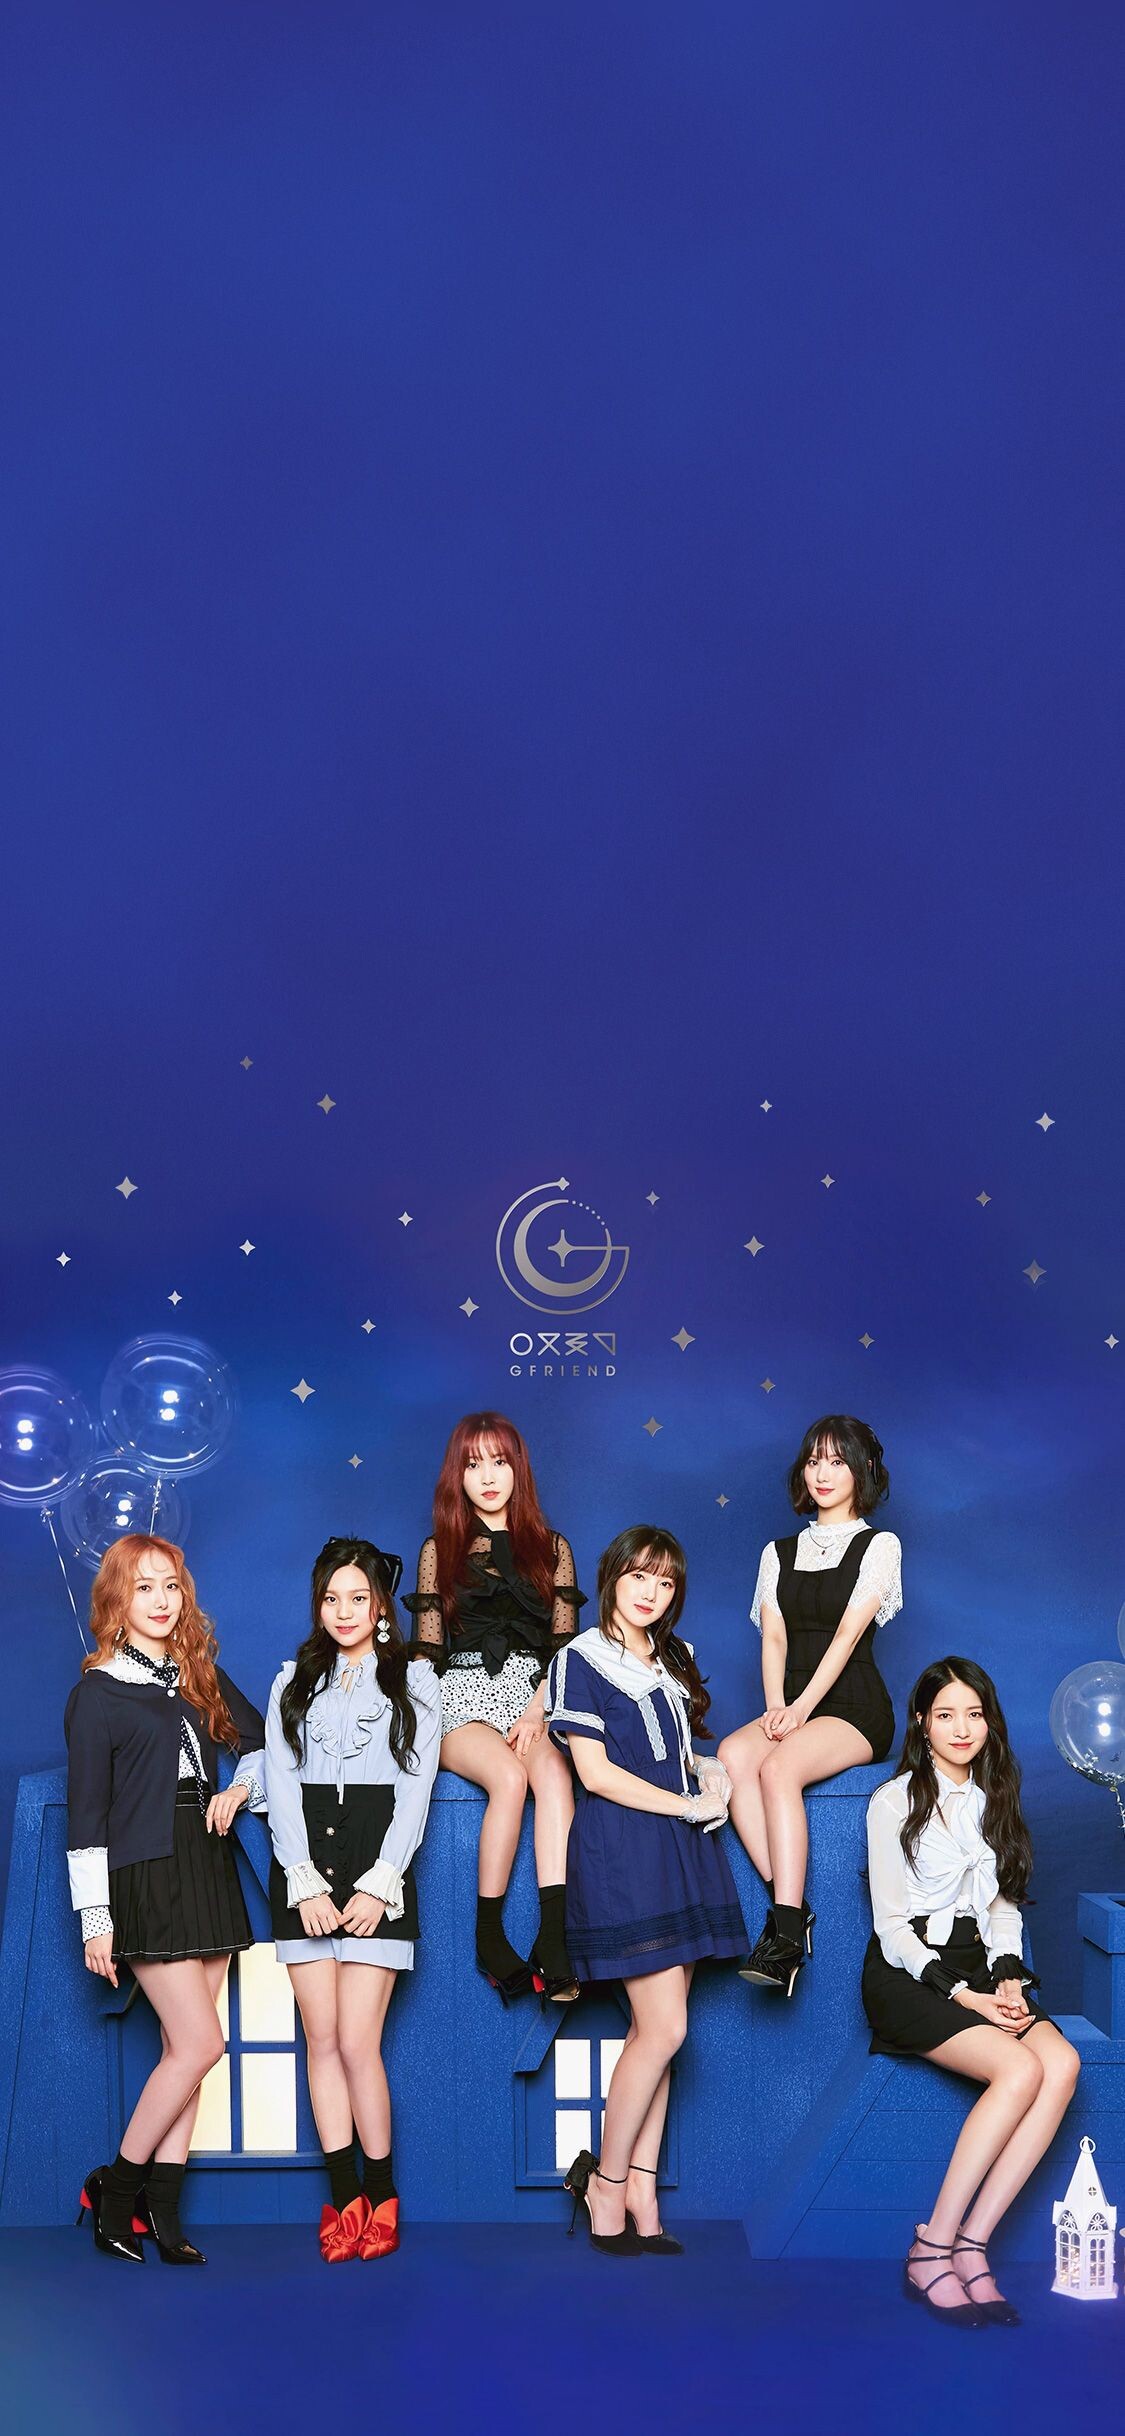 GFriend: Presentation of the fourth EP, The Awakening with the leading single "Fingertip". 1130x2440 HD Background.